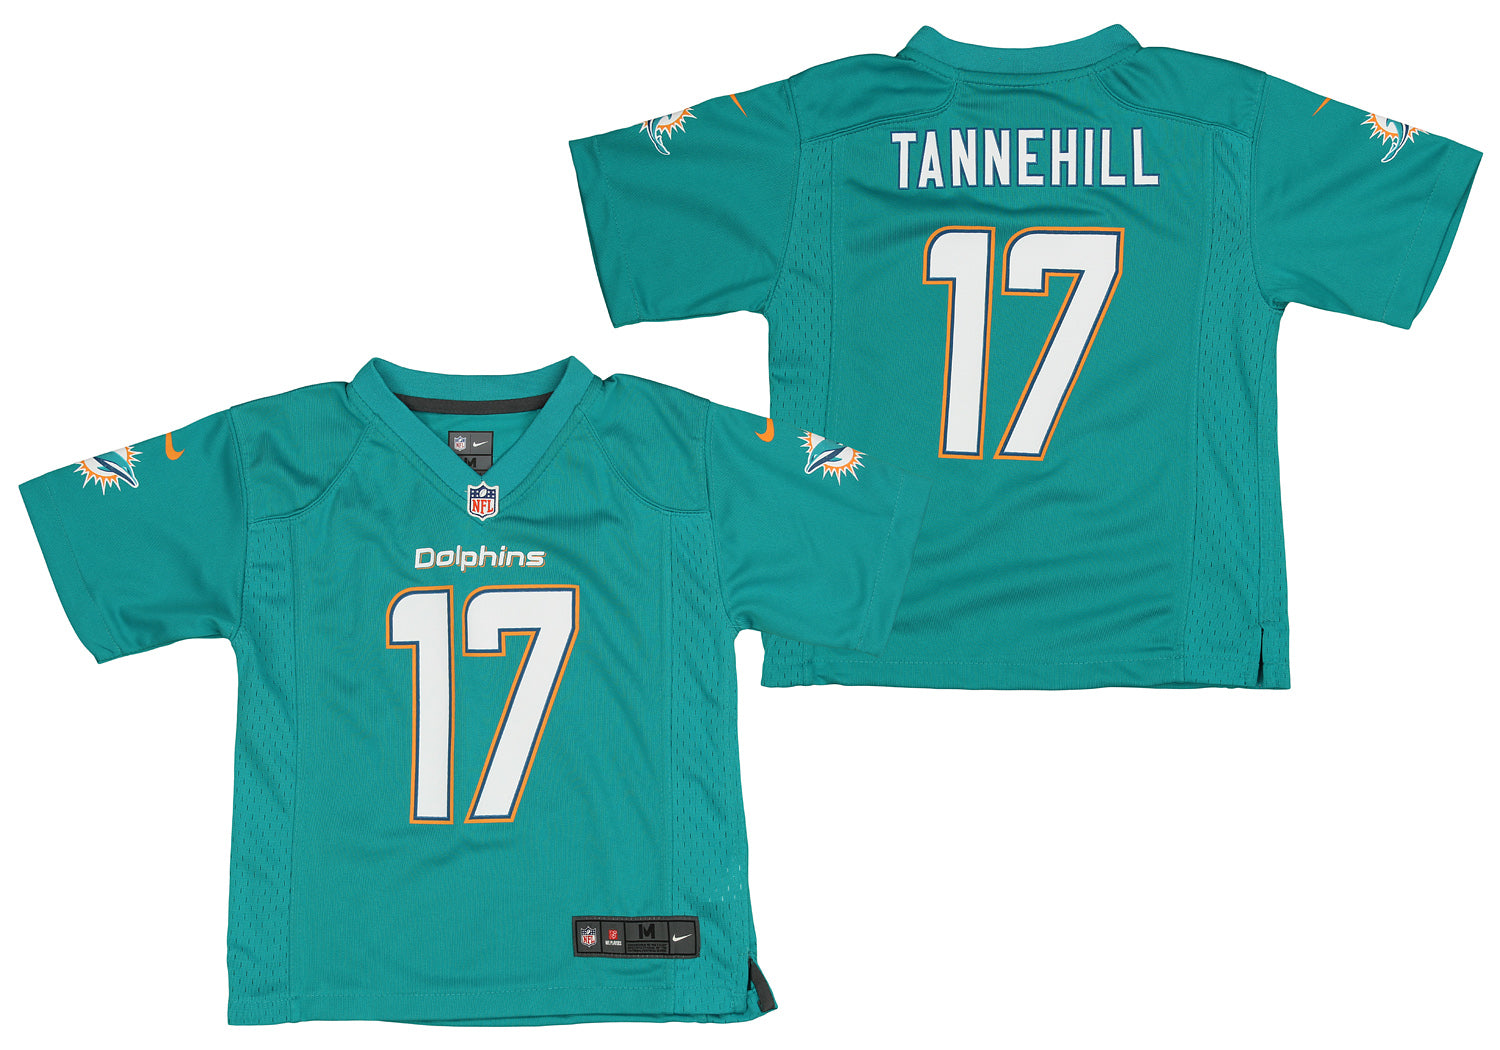 72 dolphins jersey